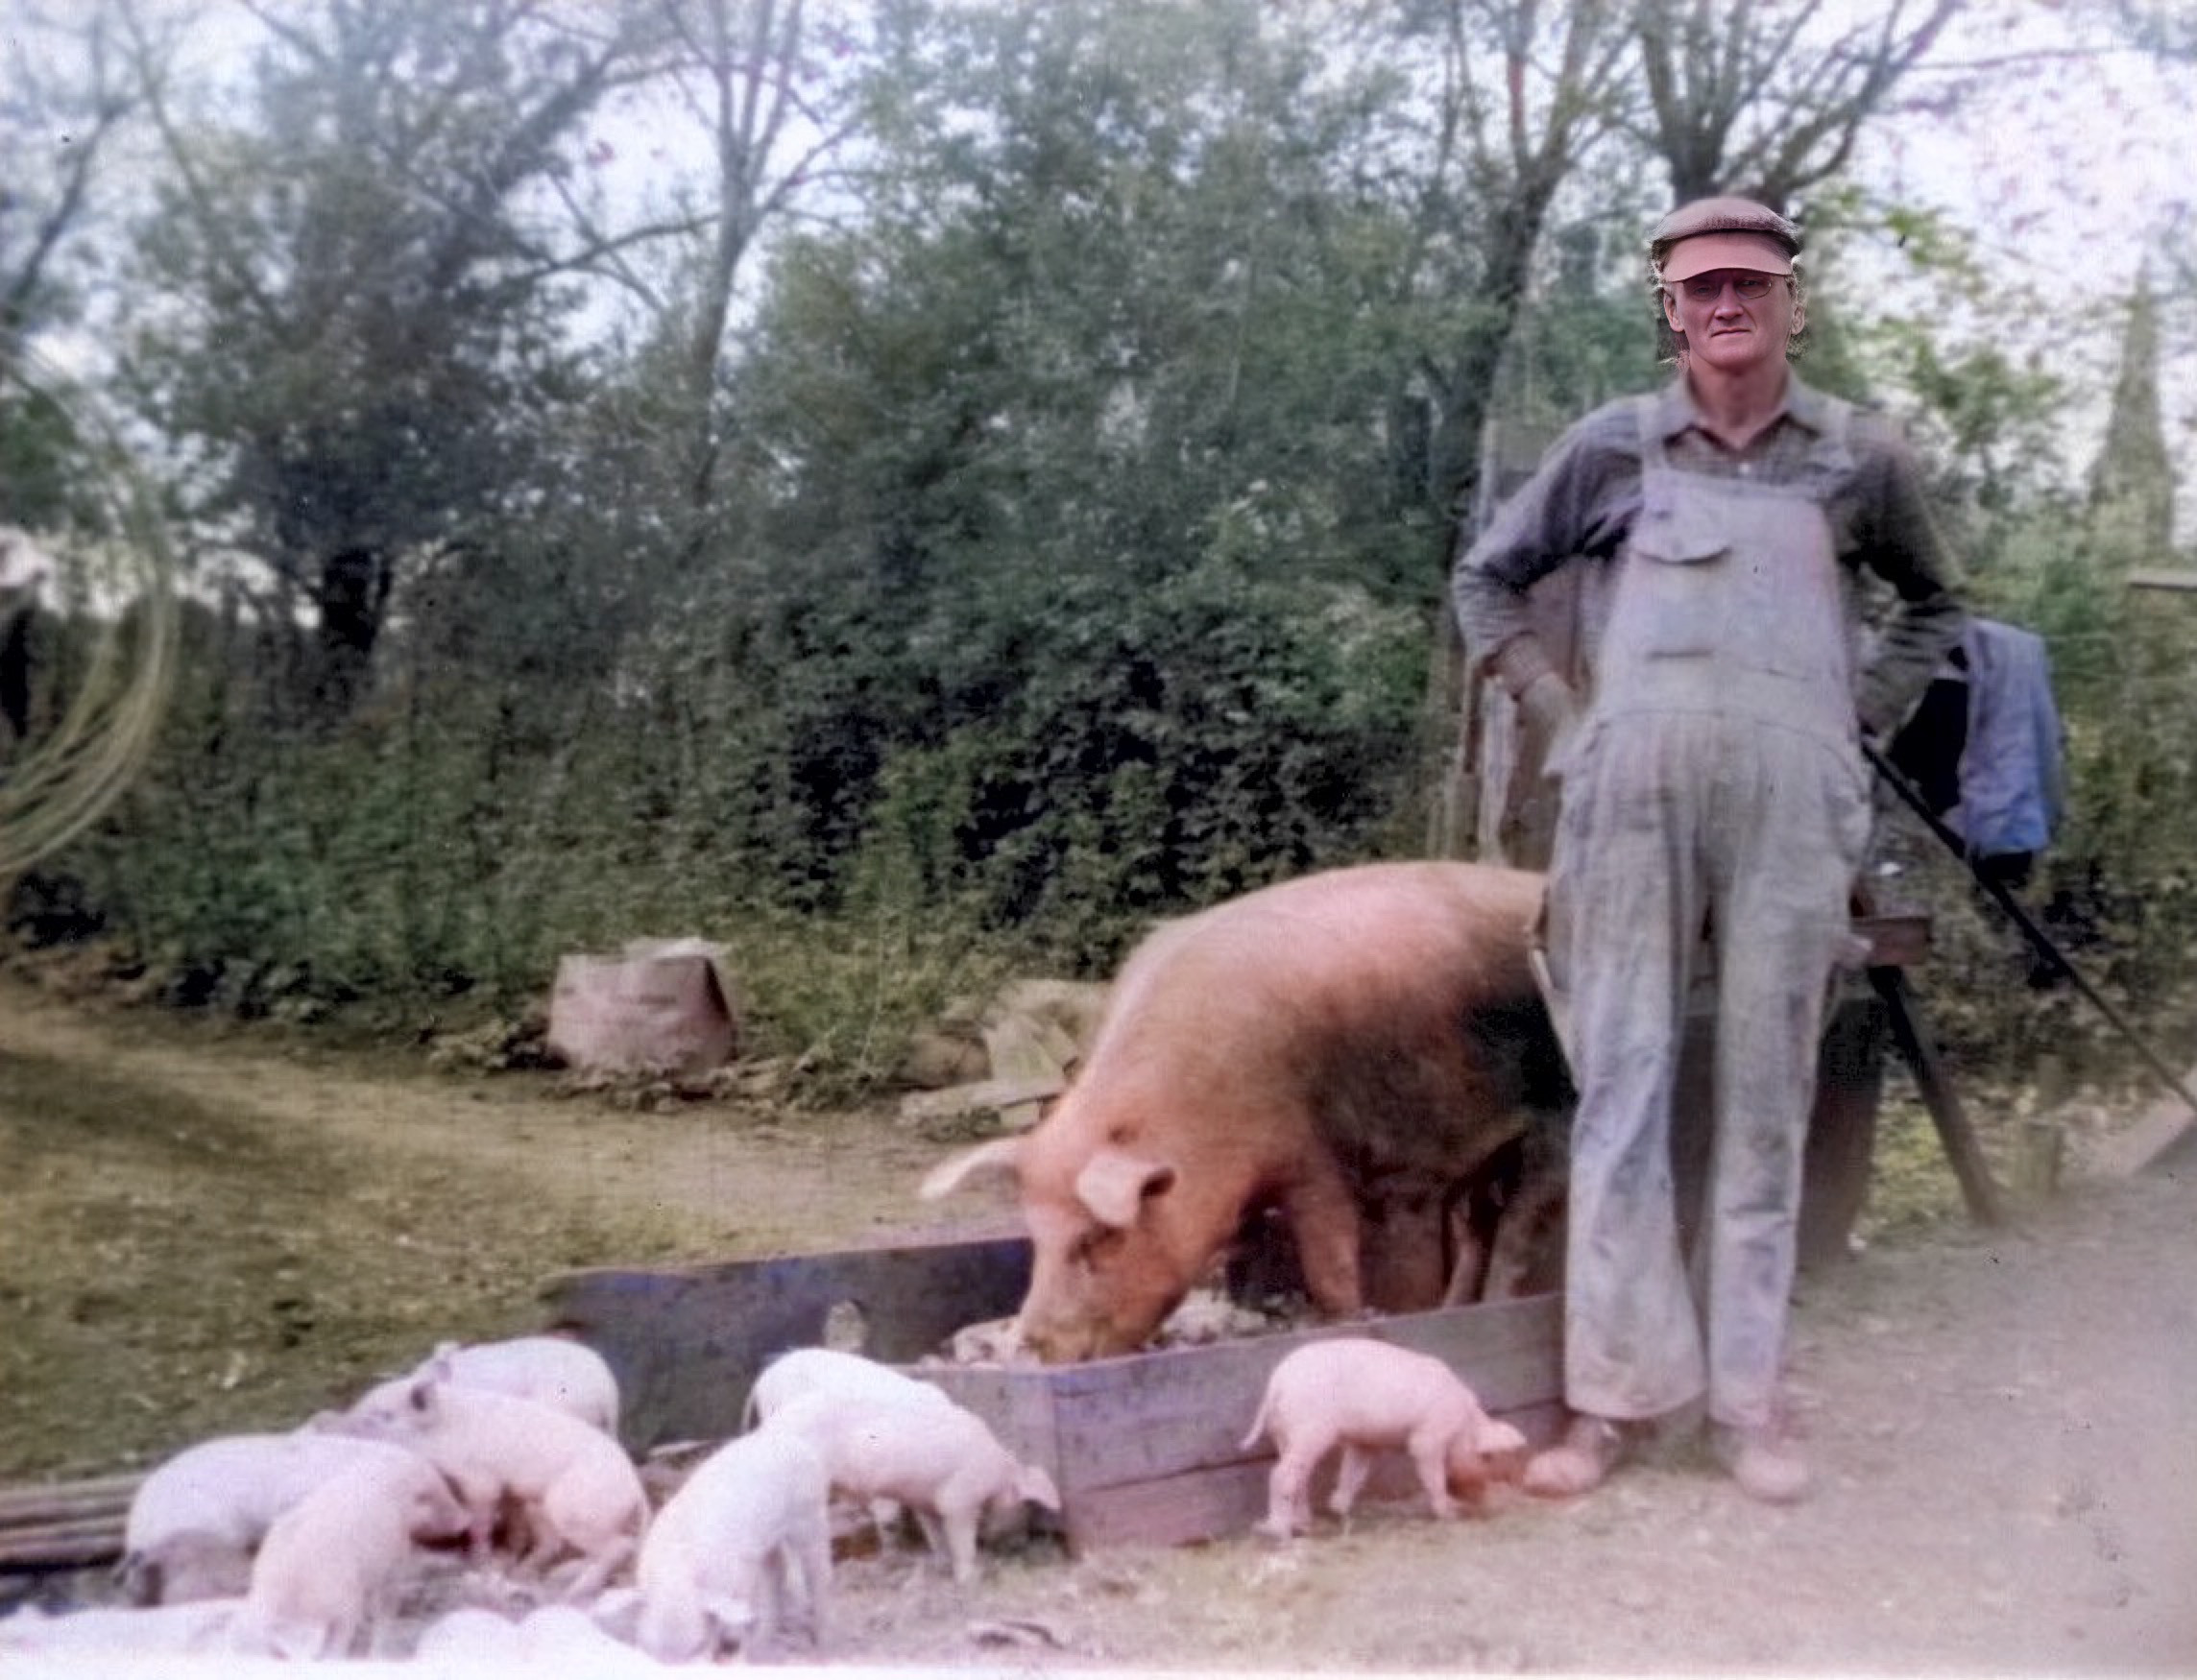 My wife’s paternal great-grandfather, Andrew, raising hogs in Minnesota. 1930’s